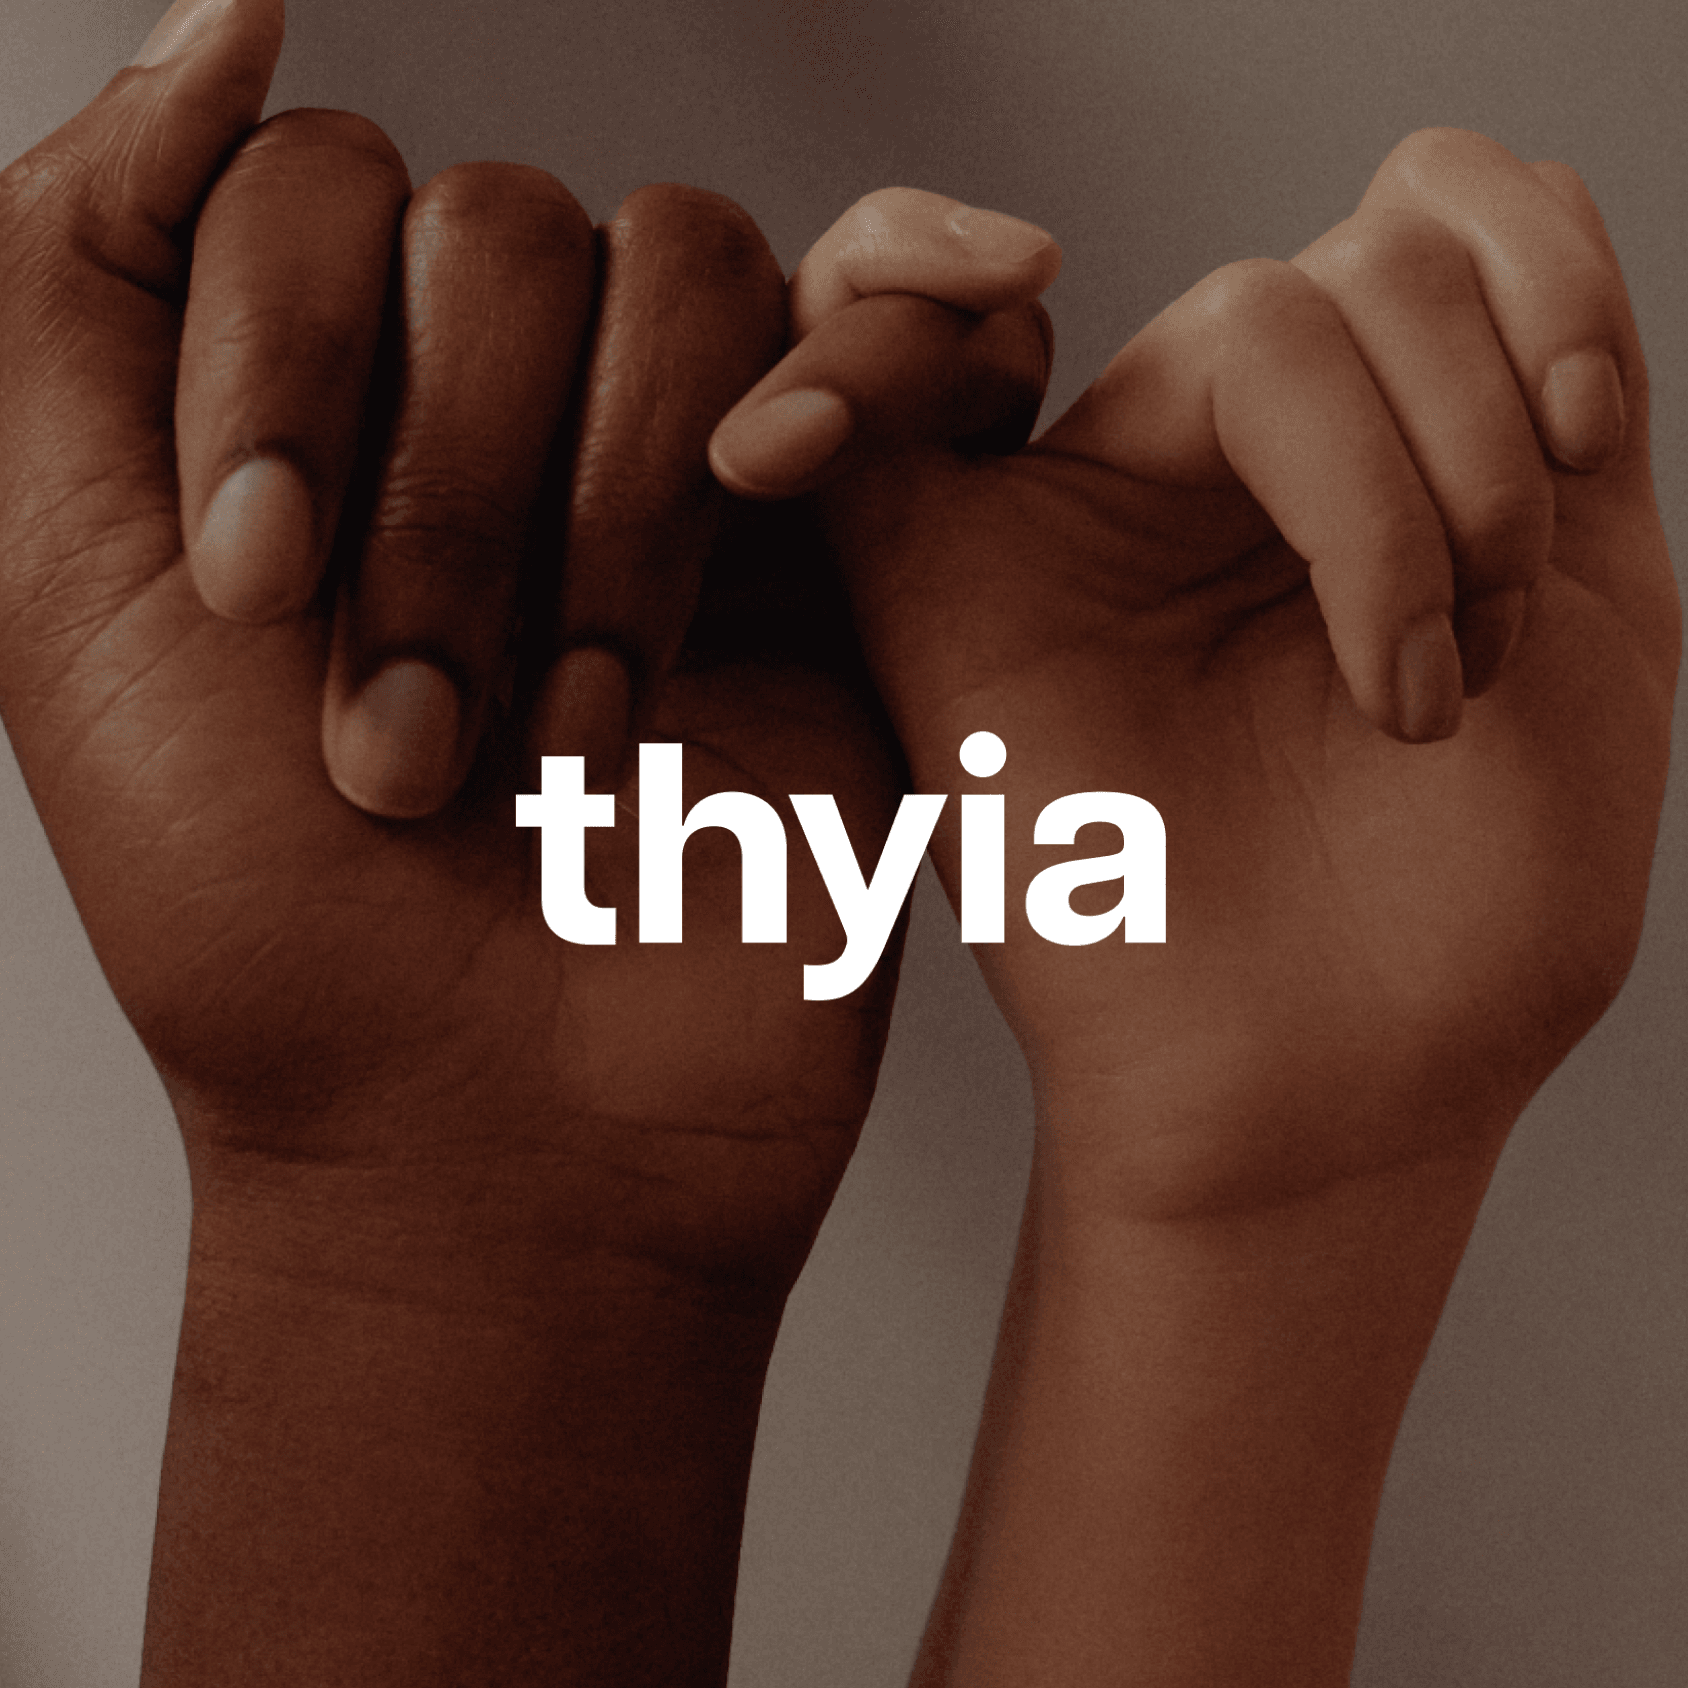 Thyia brand with hands crossing fingers on background